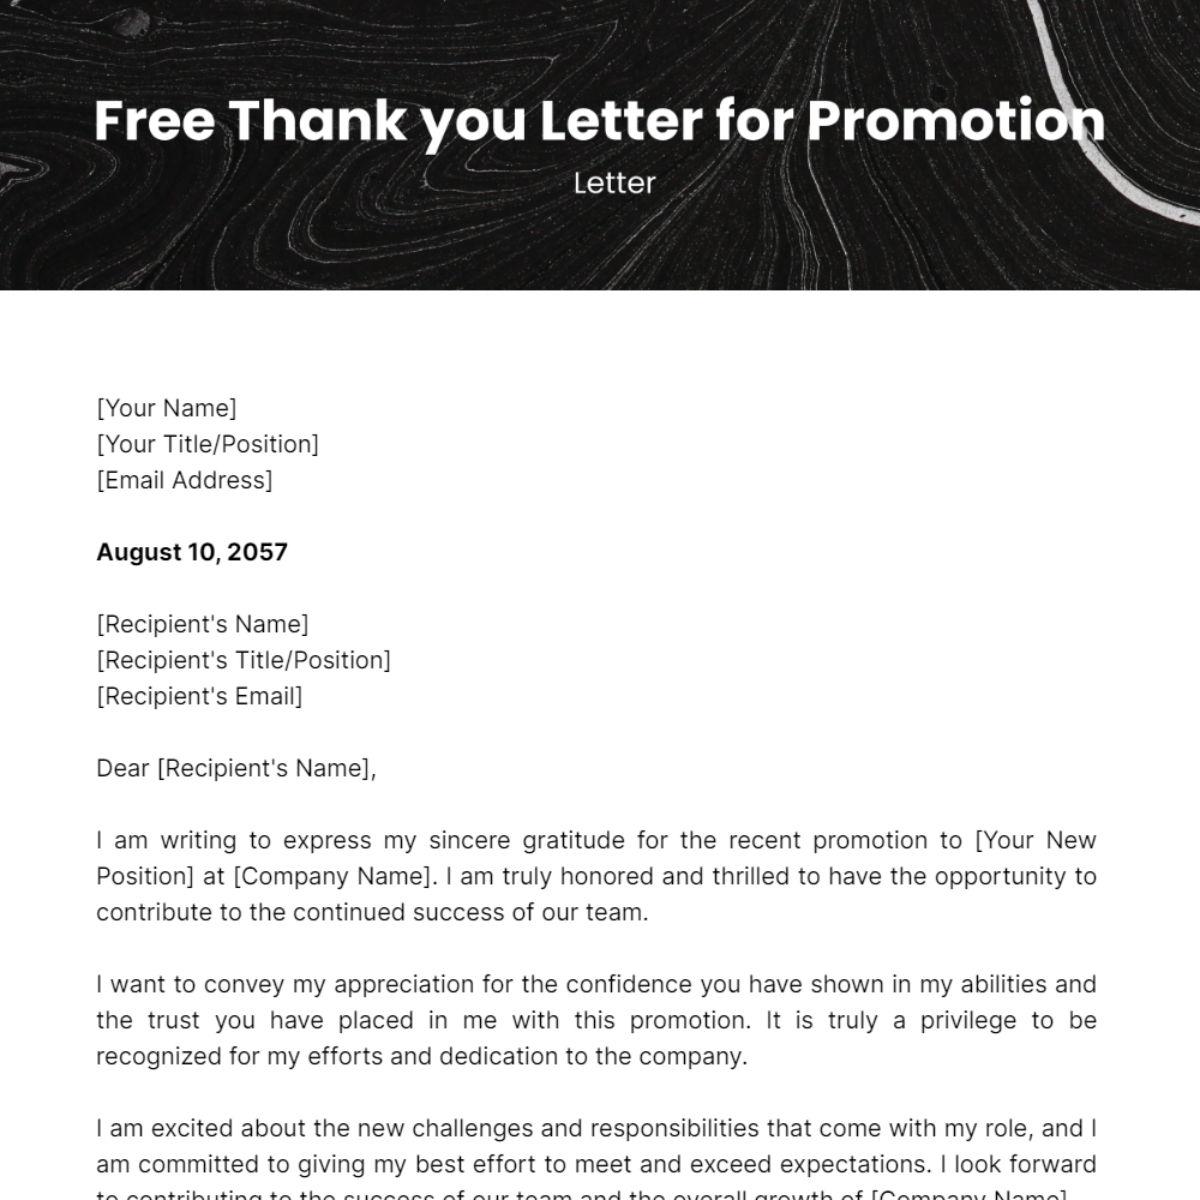 Thank you Letter for Promotion Template